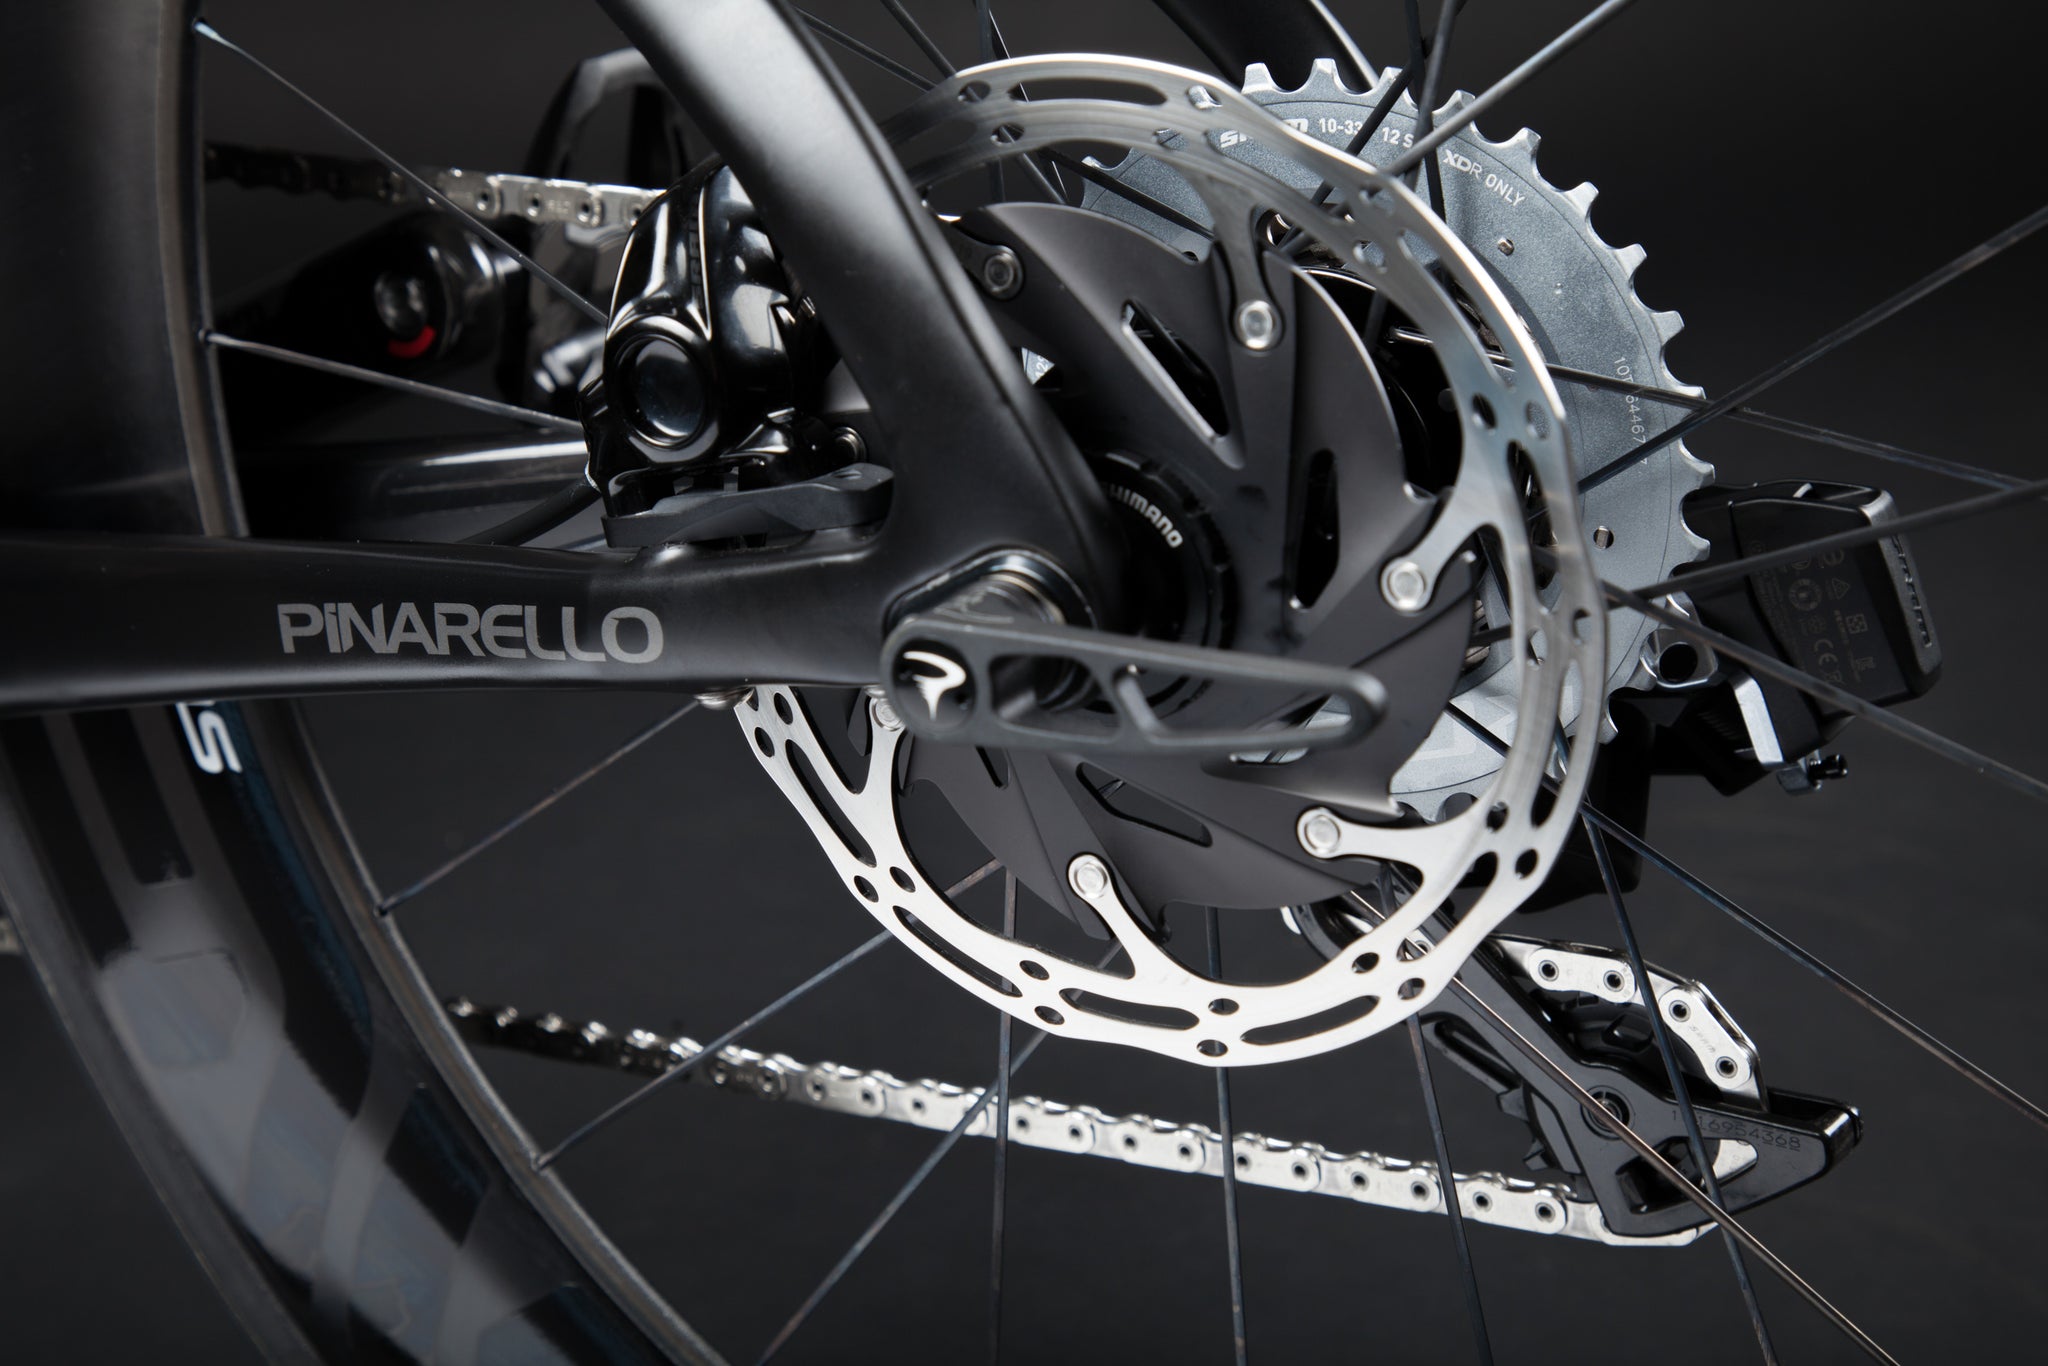 A Blacked Out Pinarello Bolide Gallery rear dropout rotor